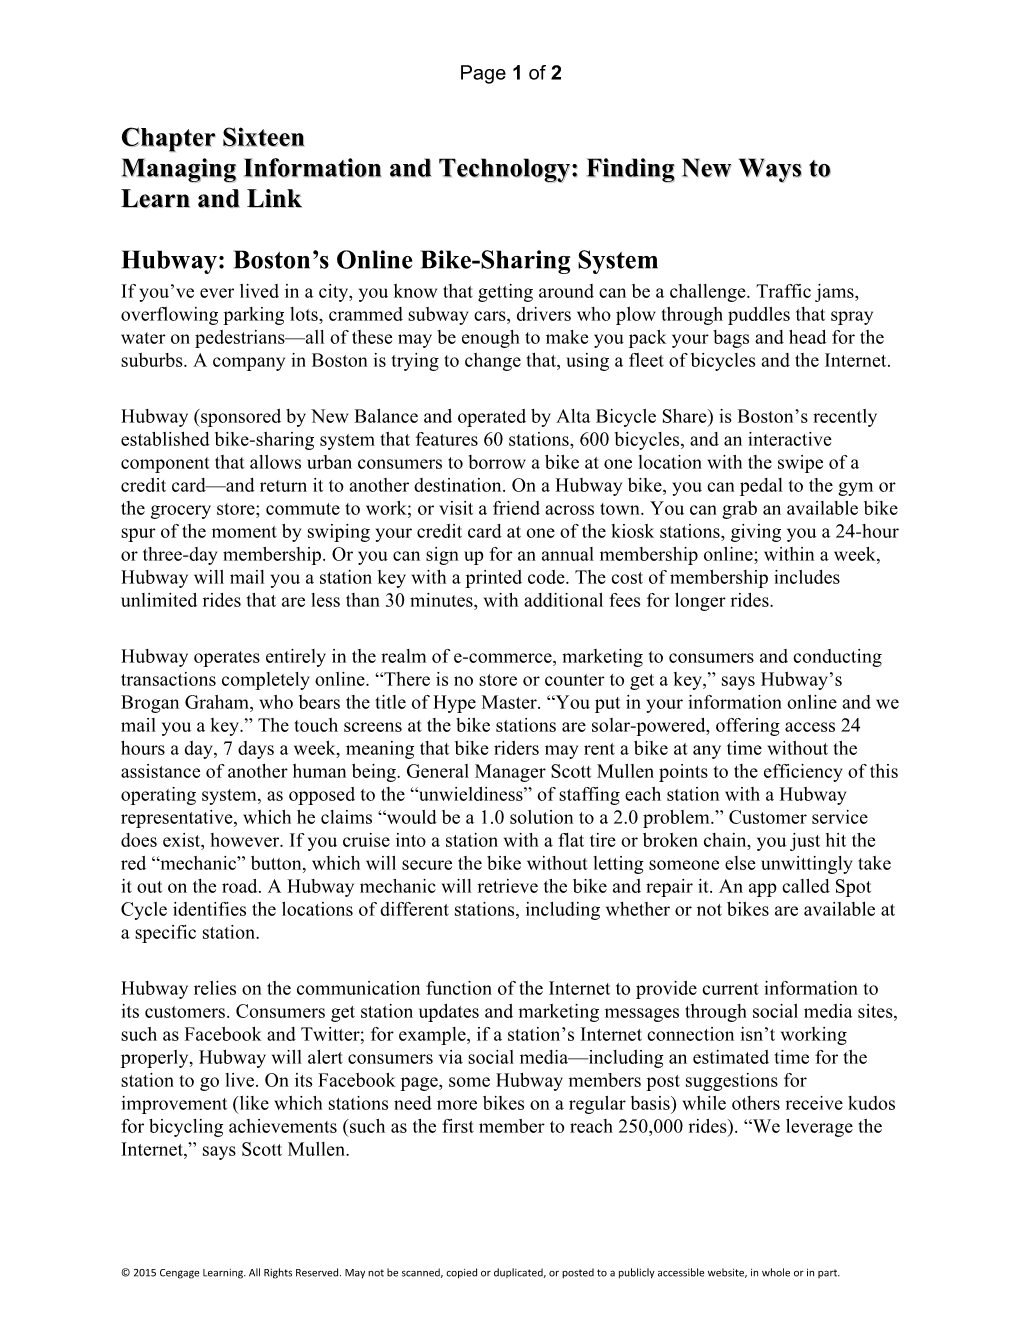 Managing Information and Technology: Finding New Ways to Learn and Link